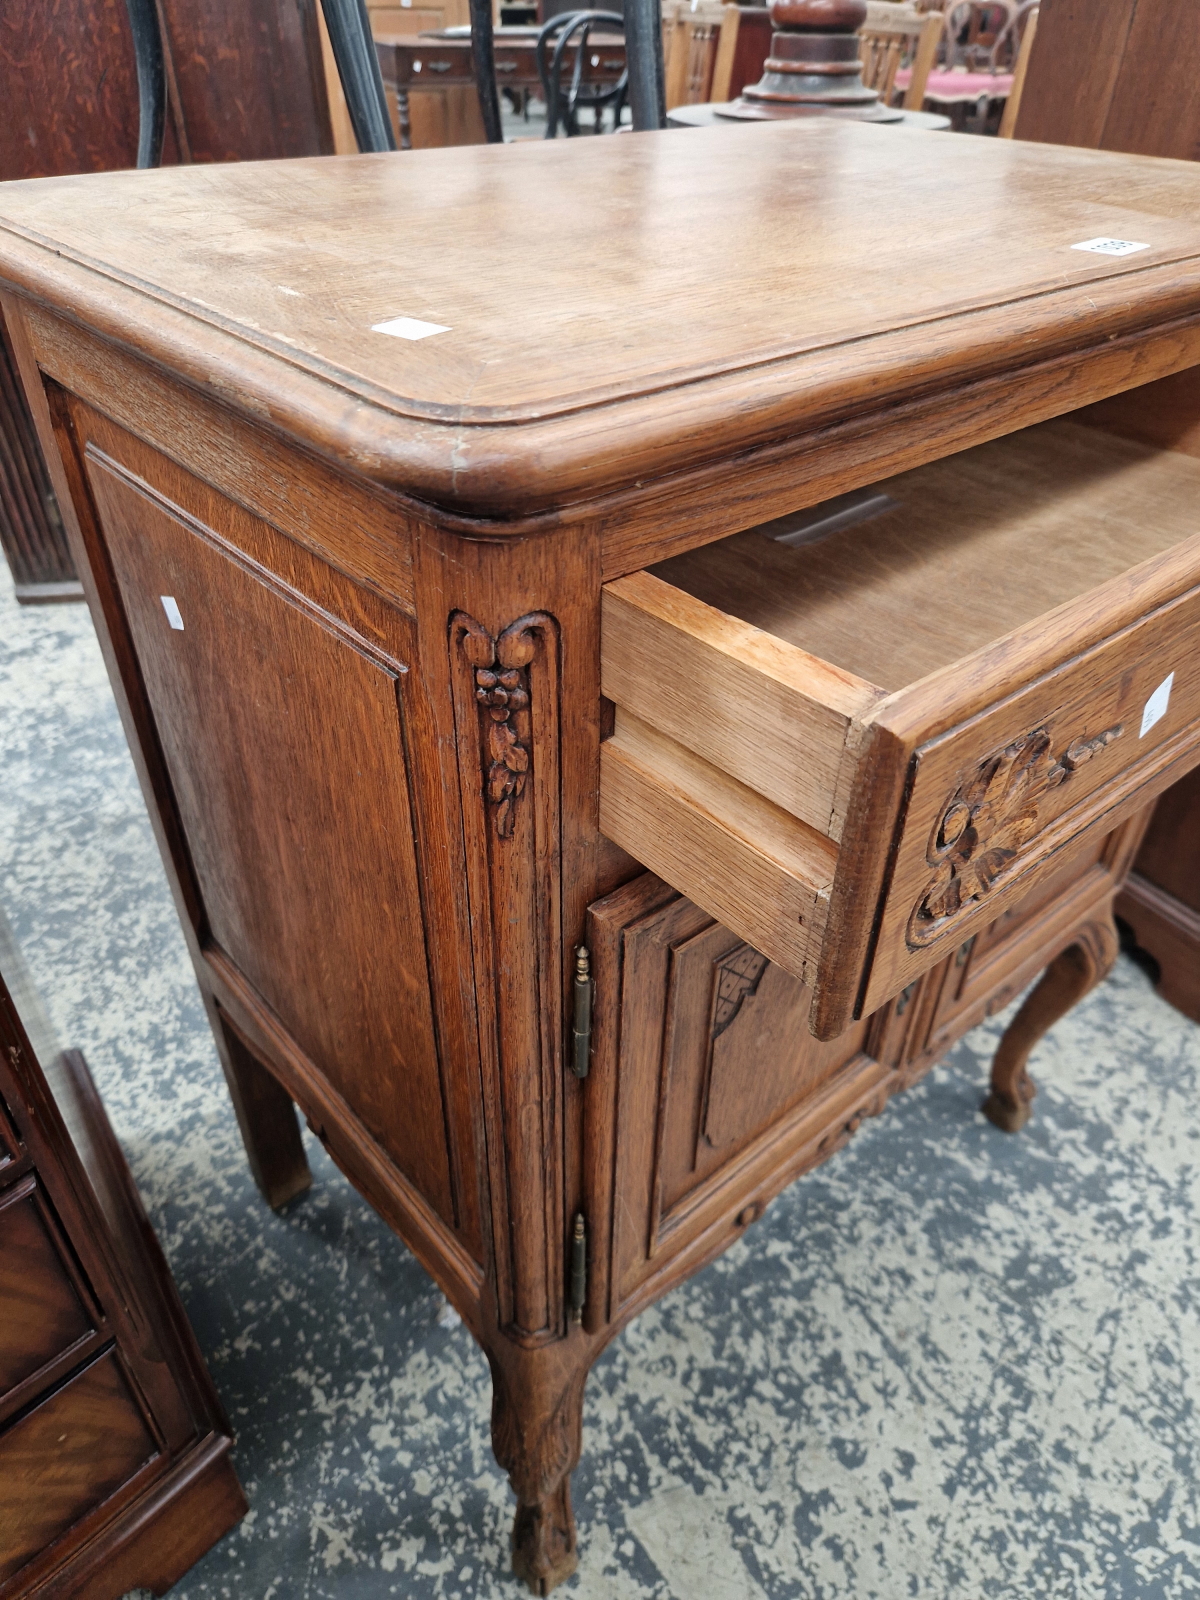 AN OAK SIDE CABINET WITH A DRAWER ABOVE PANELLED DOORS, CABRIOLE FRONT LEGS ON CARVED FEET - Image 4 of 4